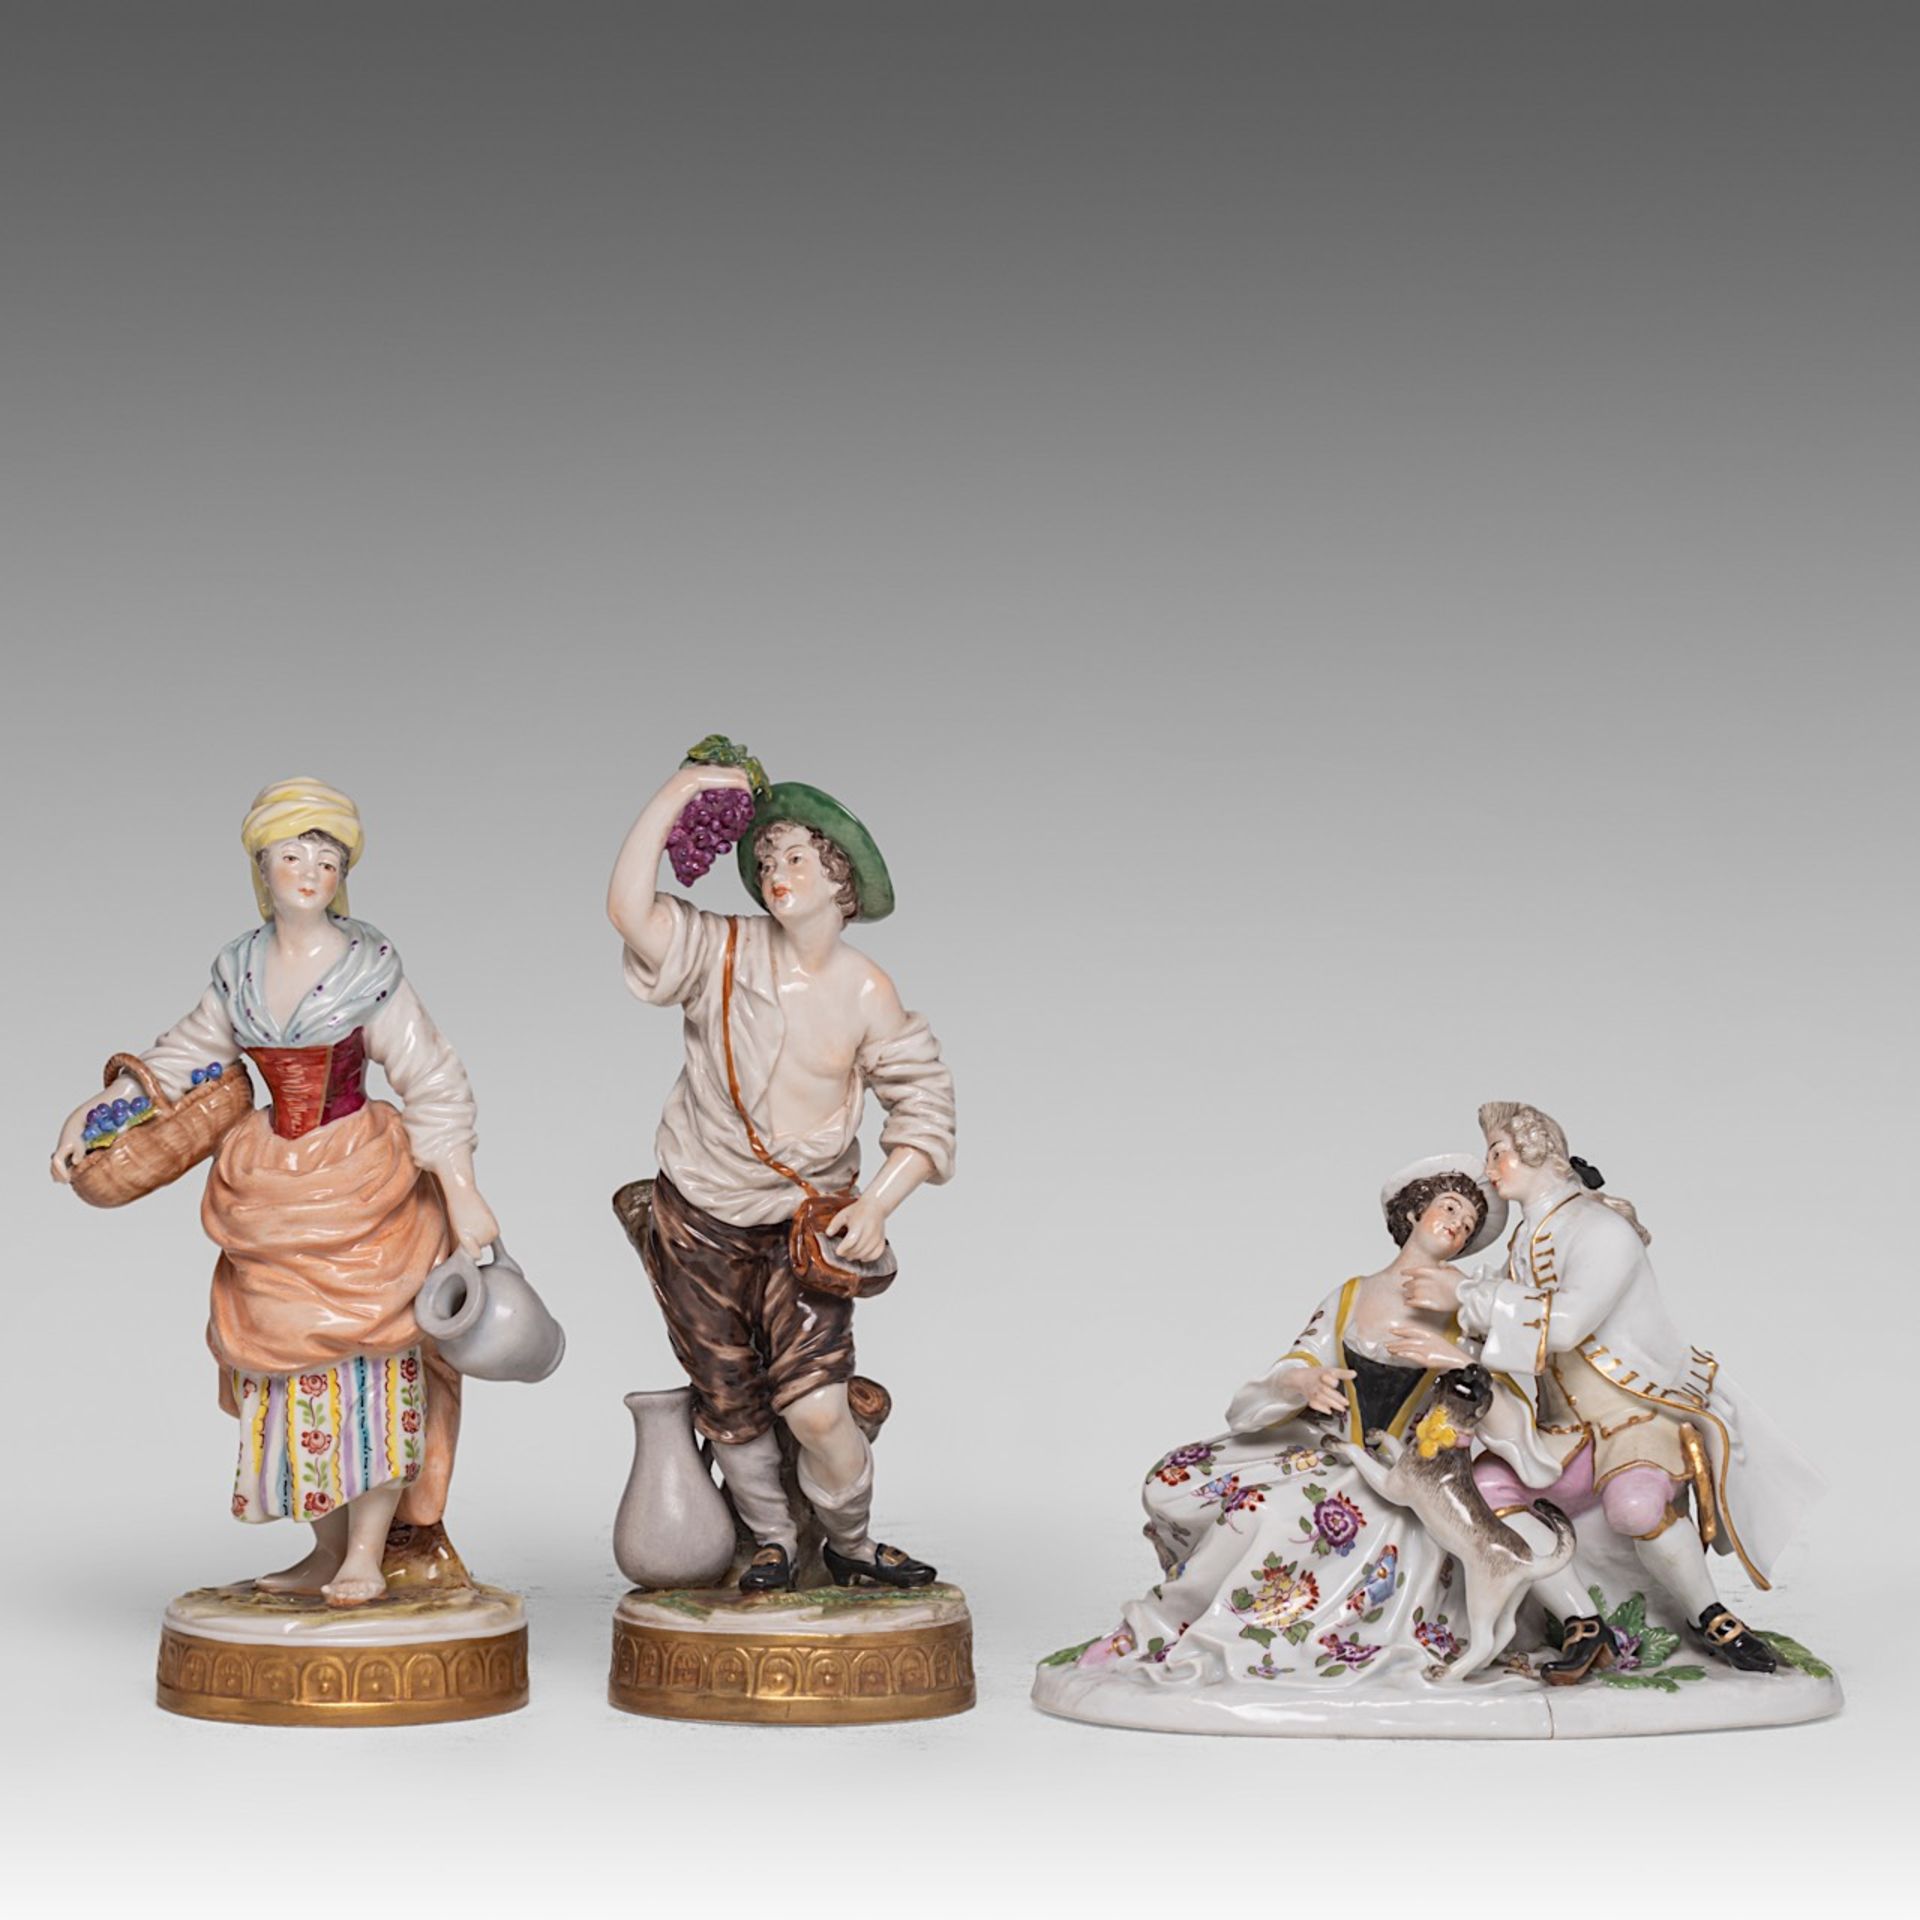 A collection of polychrome decorated Saxon porcelain figurines and a candelabra, H 51,5 cm (tallest) - Image 6 of 13